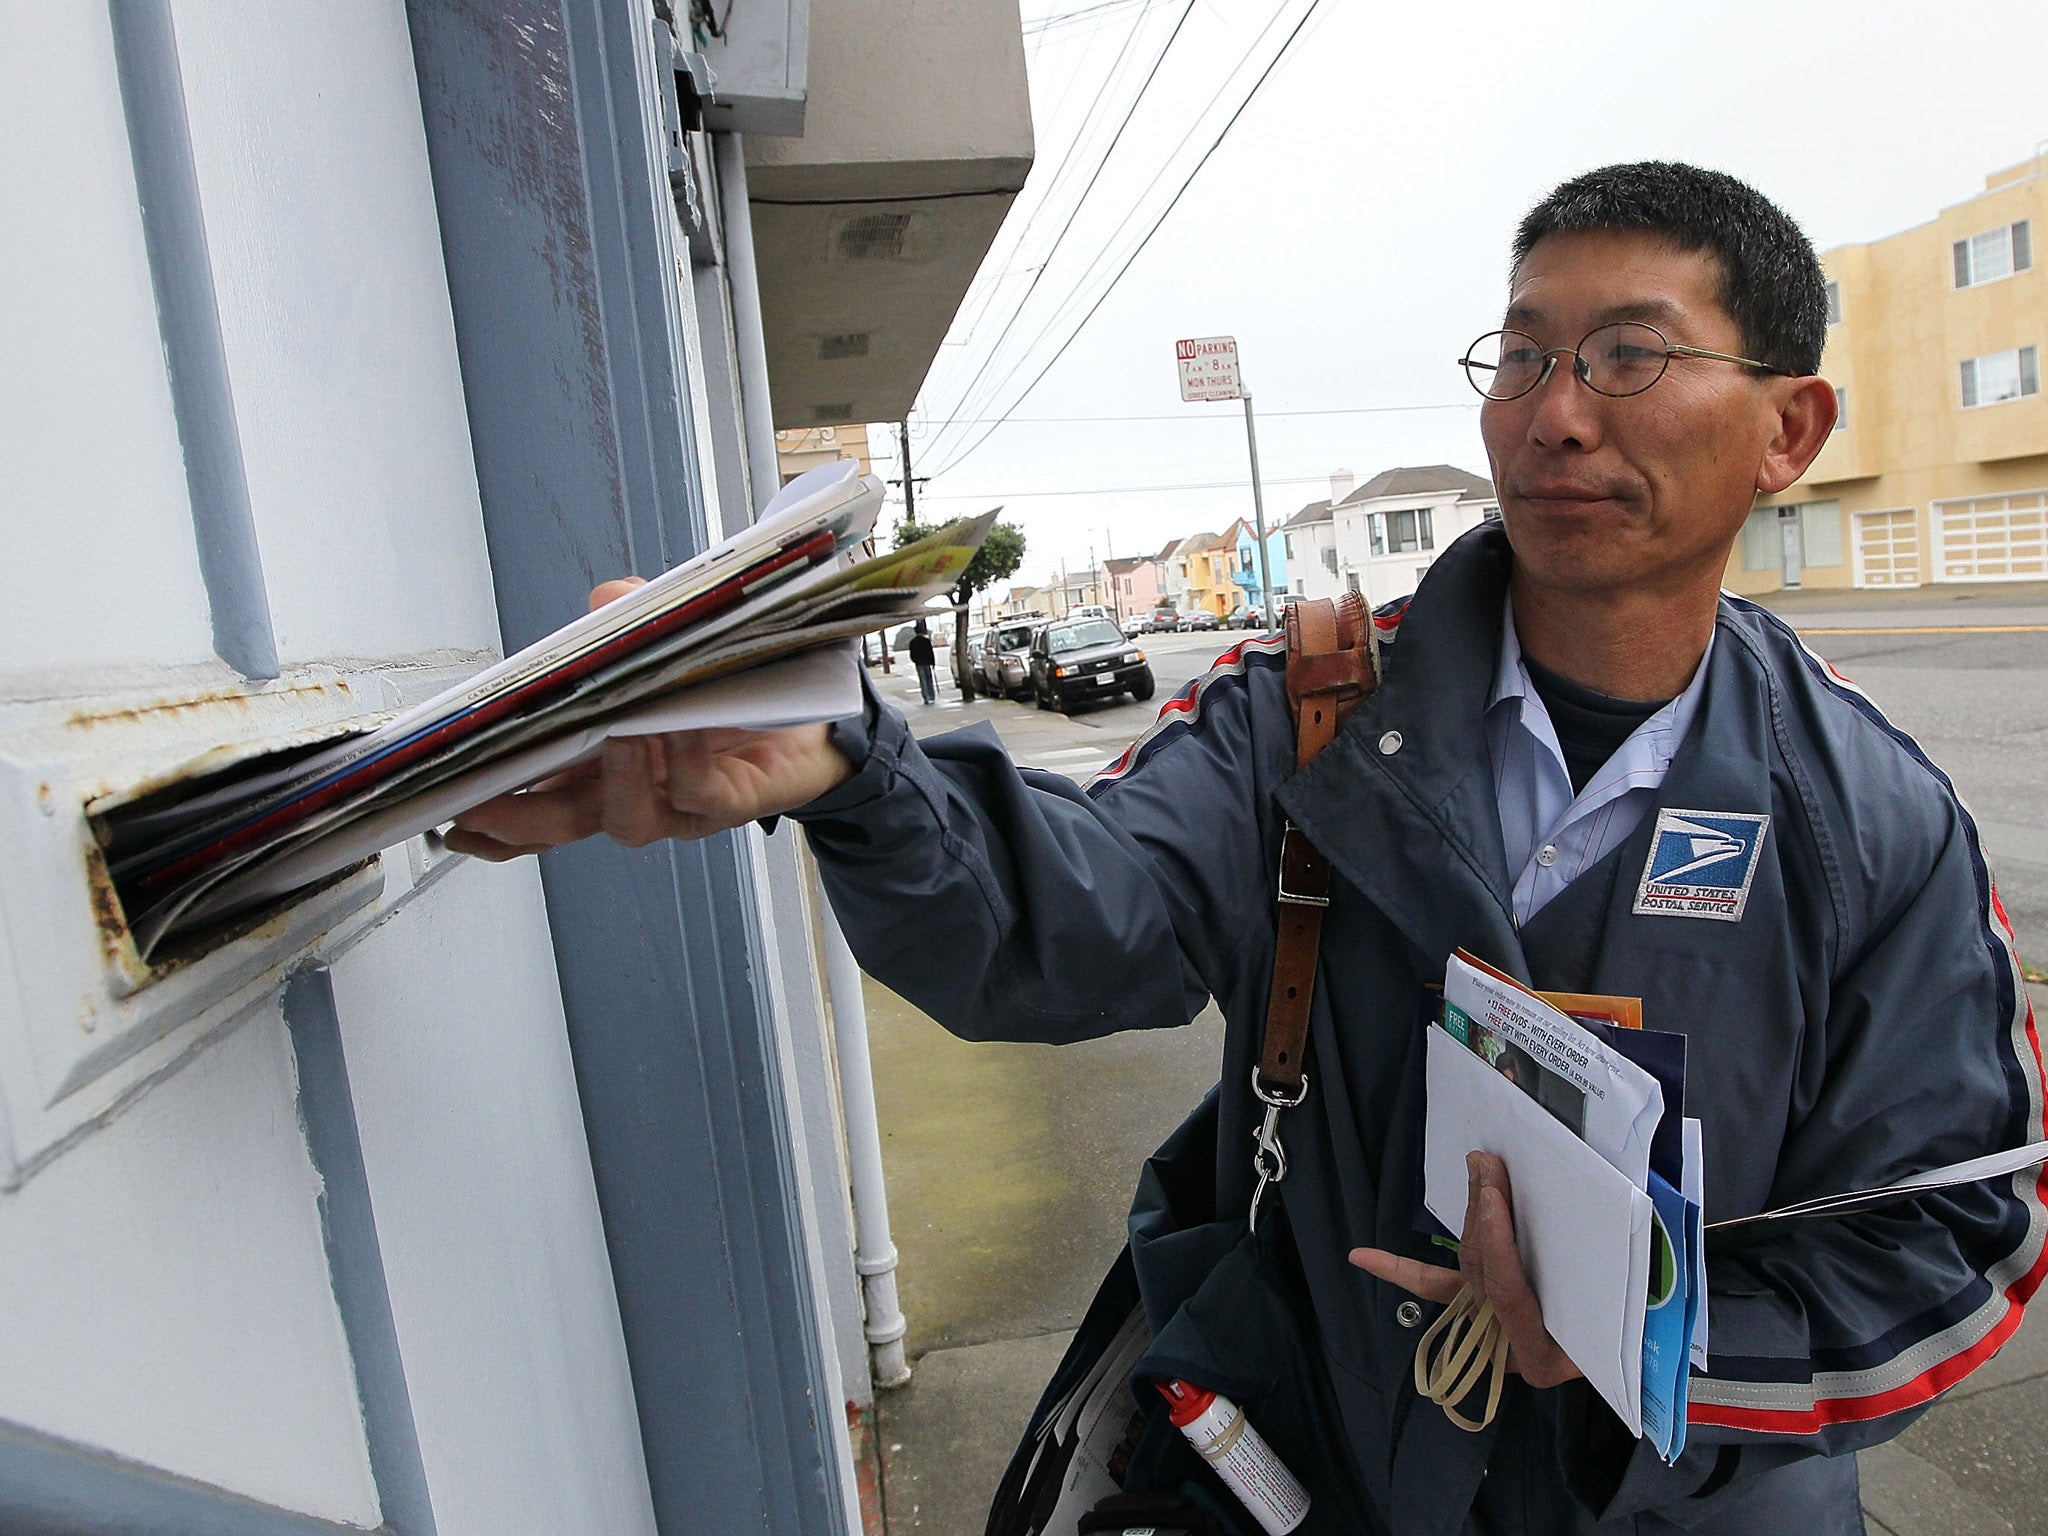 US Postal Service lettercarrier Raymond Hou delivers mail along his route